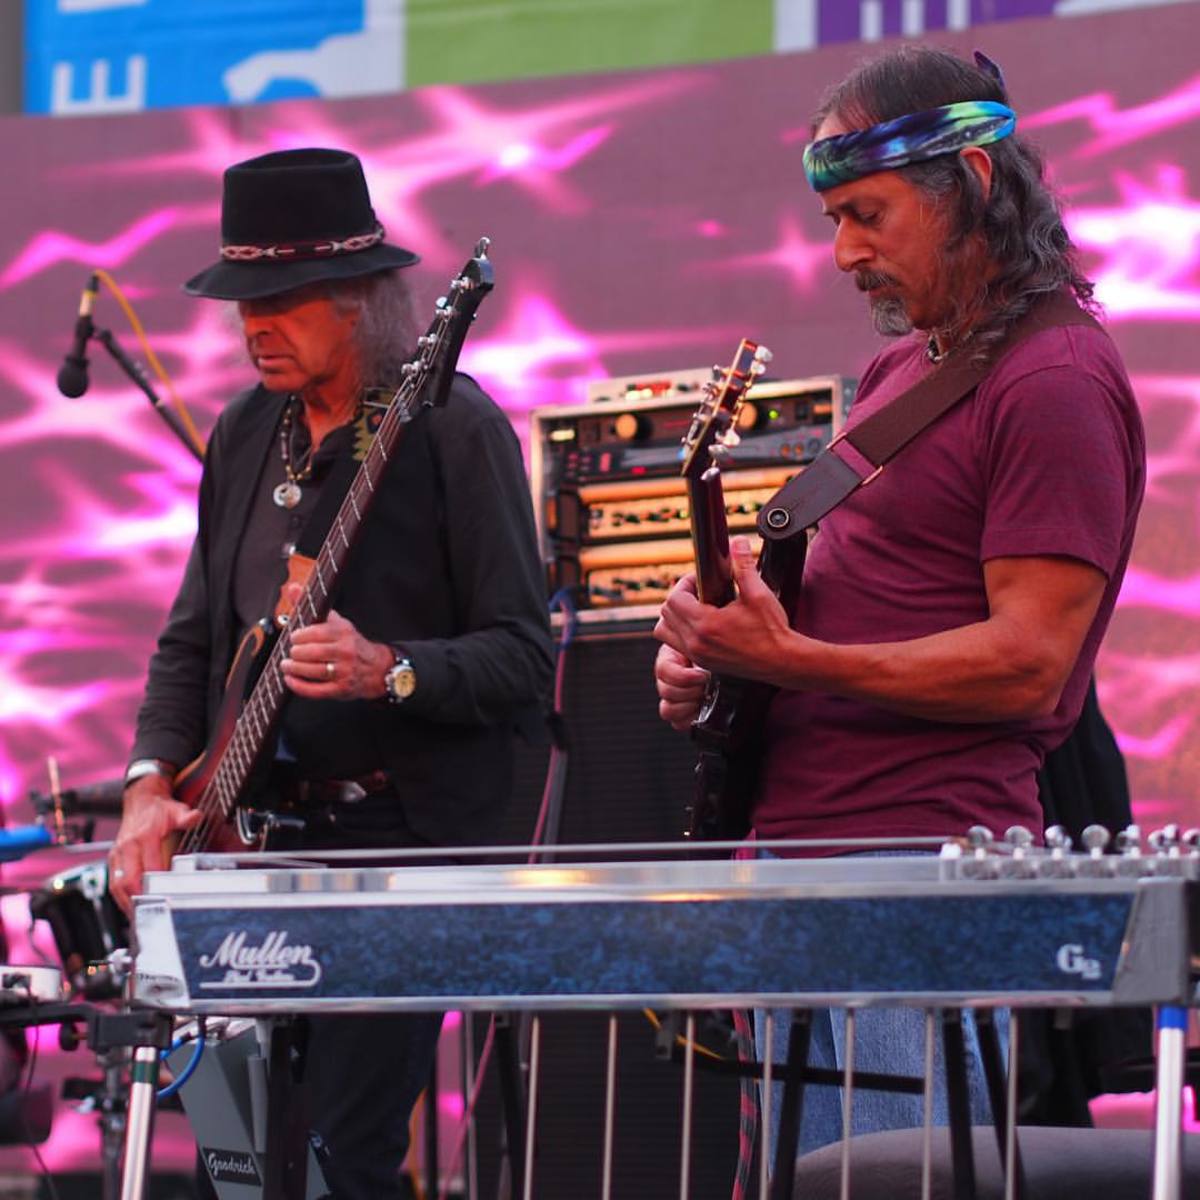 Moonalice_playing_in_Union_Square,_San_Francisco,_2015